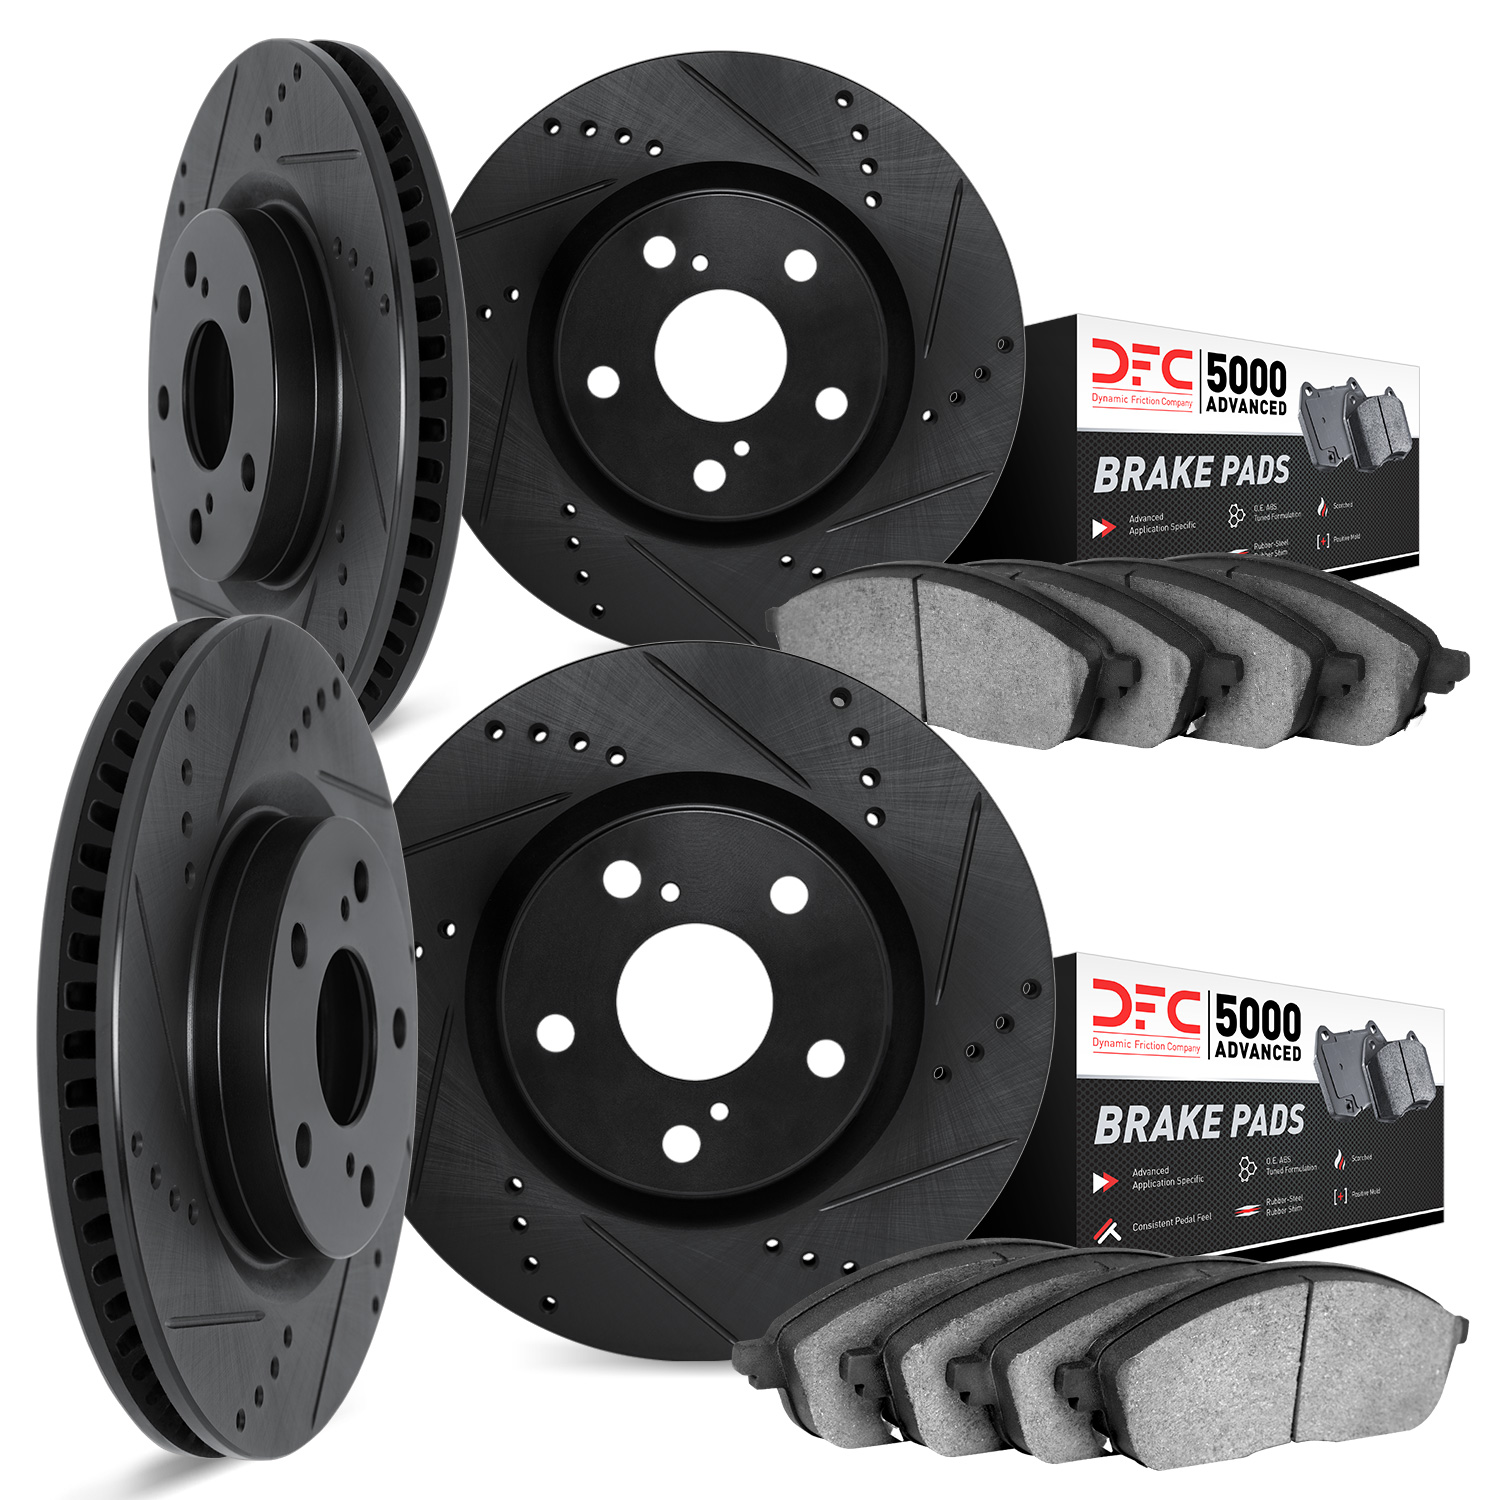 8504-31066 Drilled/Slotted Brake Rotors w/5000 Advanced Brake Pads Kit [Black], 2010-2011 BMW, Position: Front and Rear